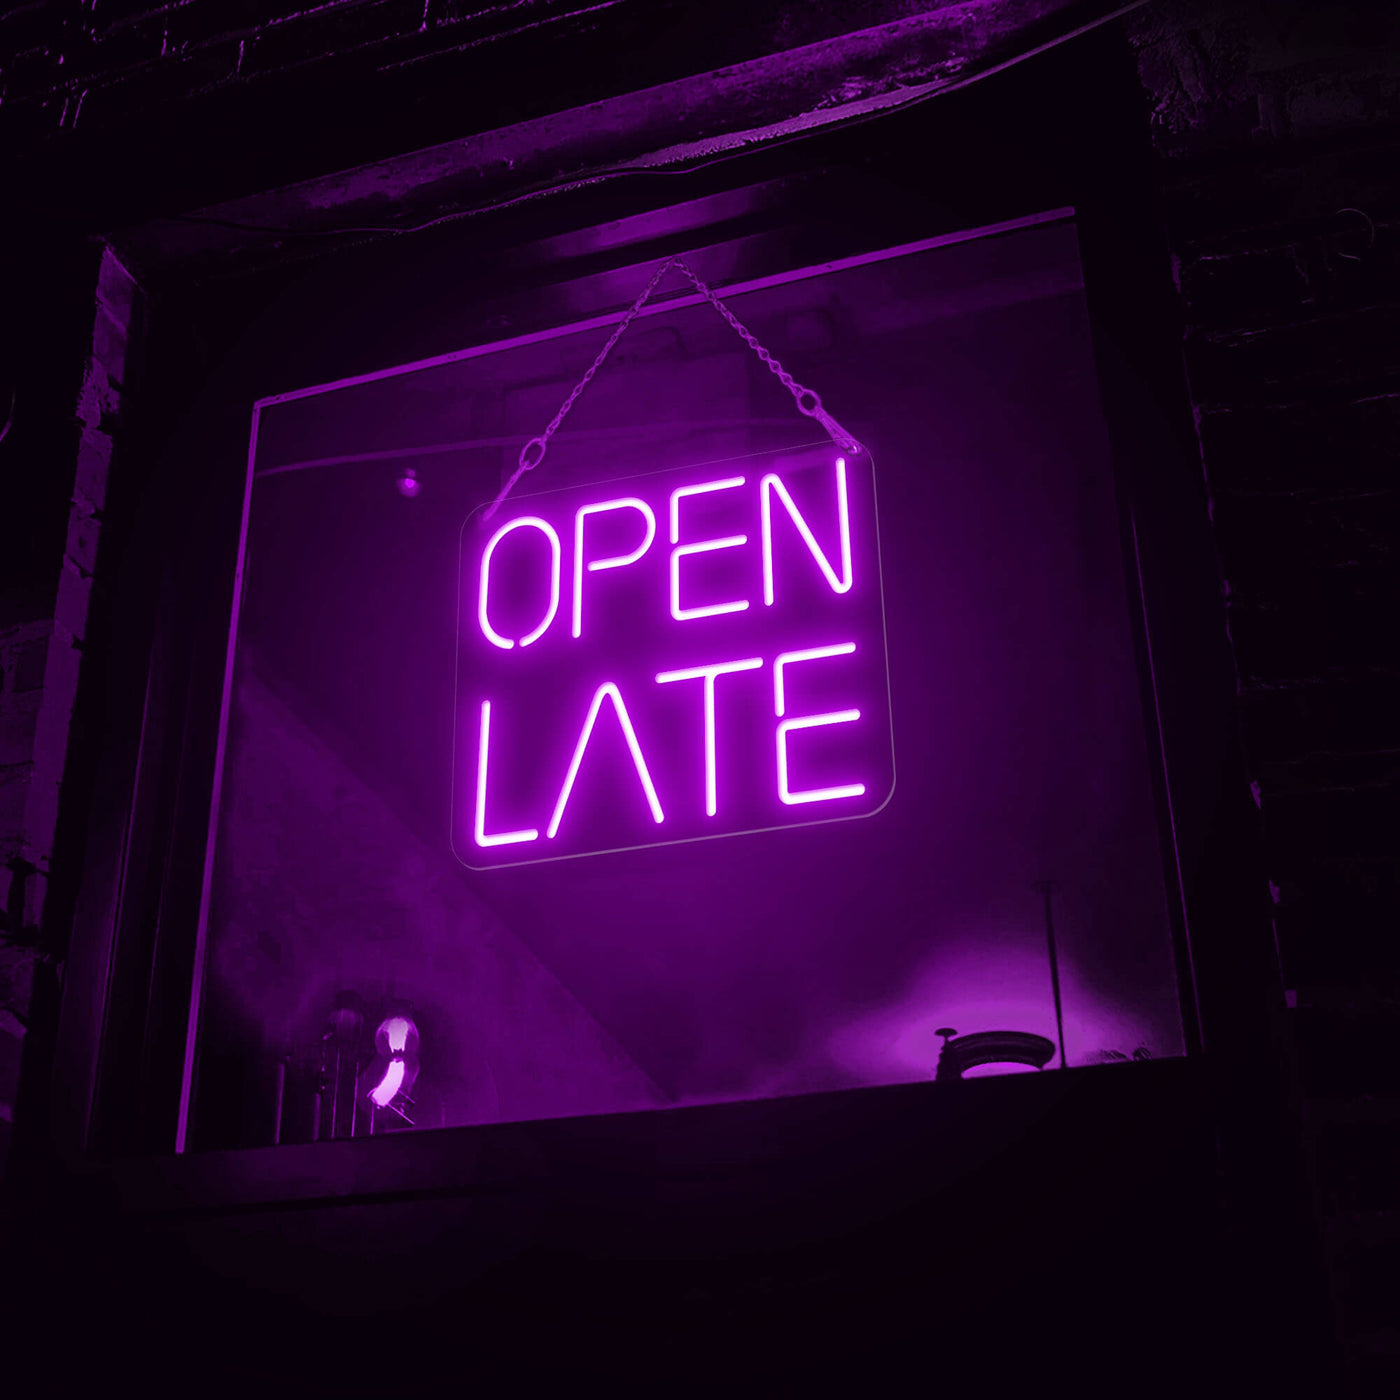 Open Late Neon Sign Business Neon Led Light purple